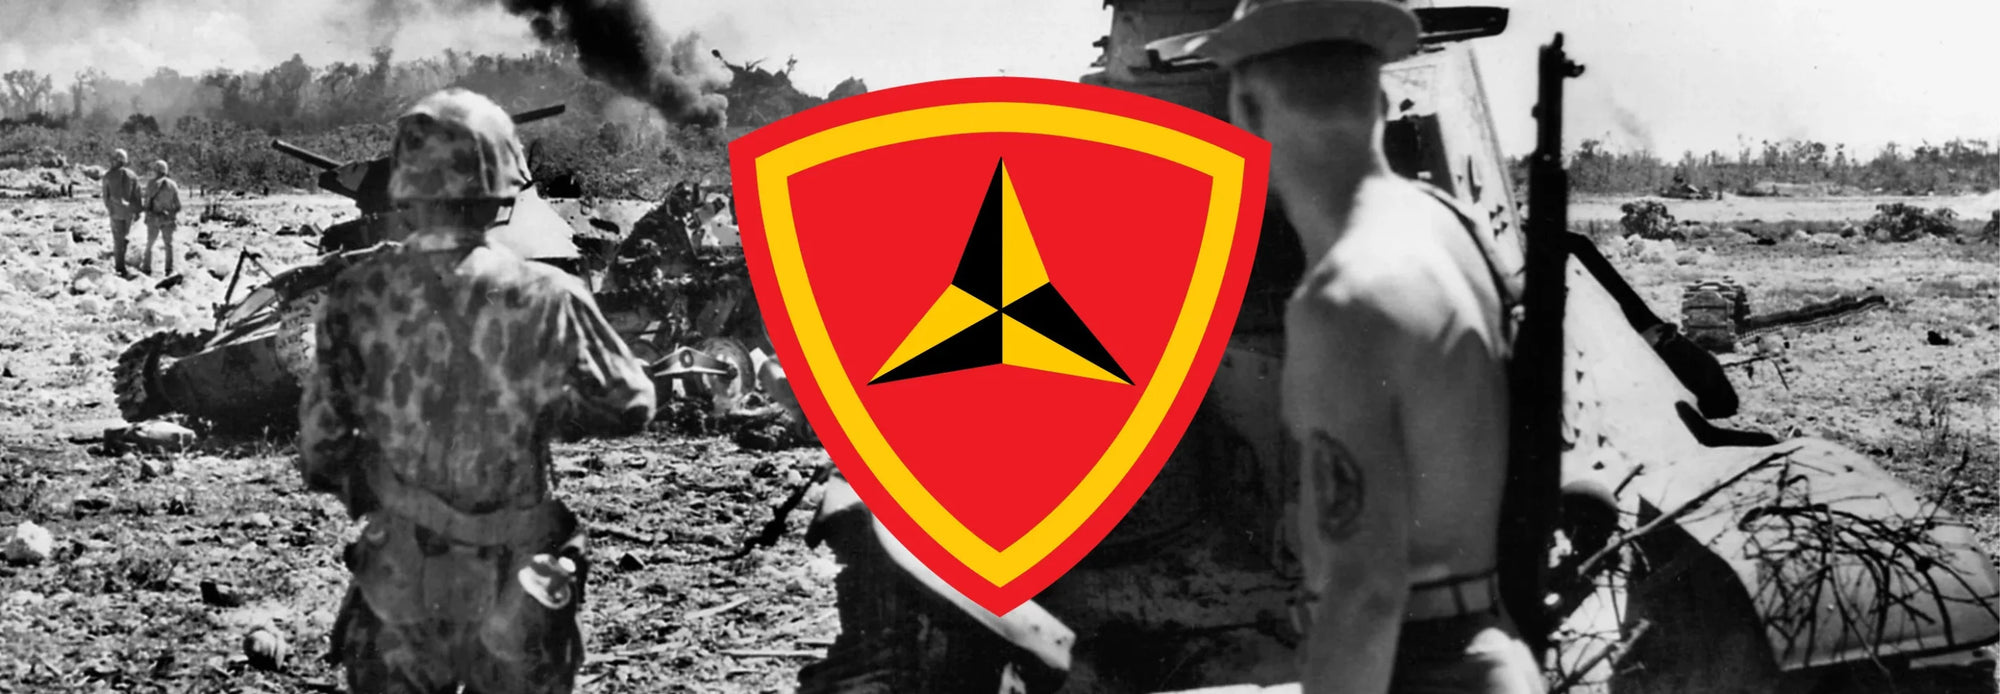 3rd Marine Division During WW2 on the island of Peleliu featuring the emblem of the division in the center 